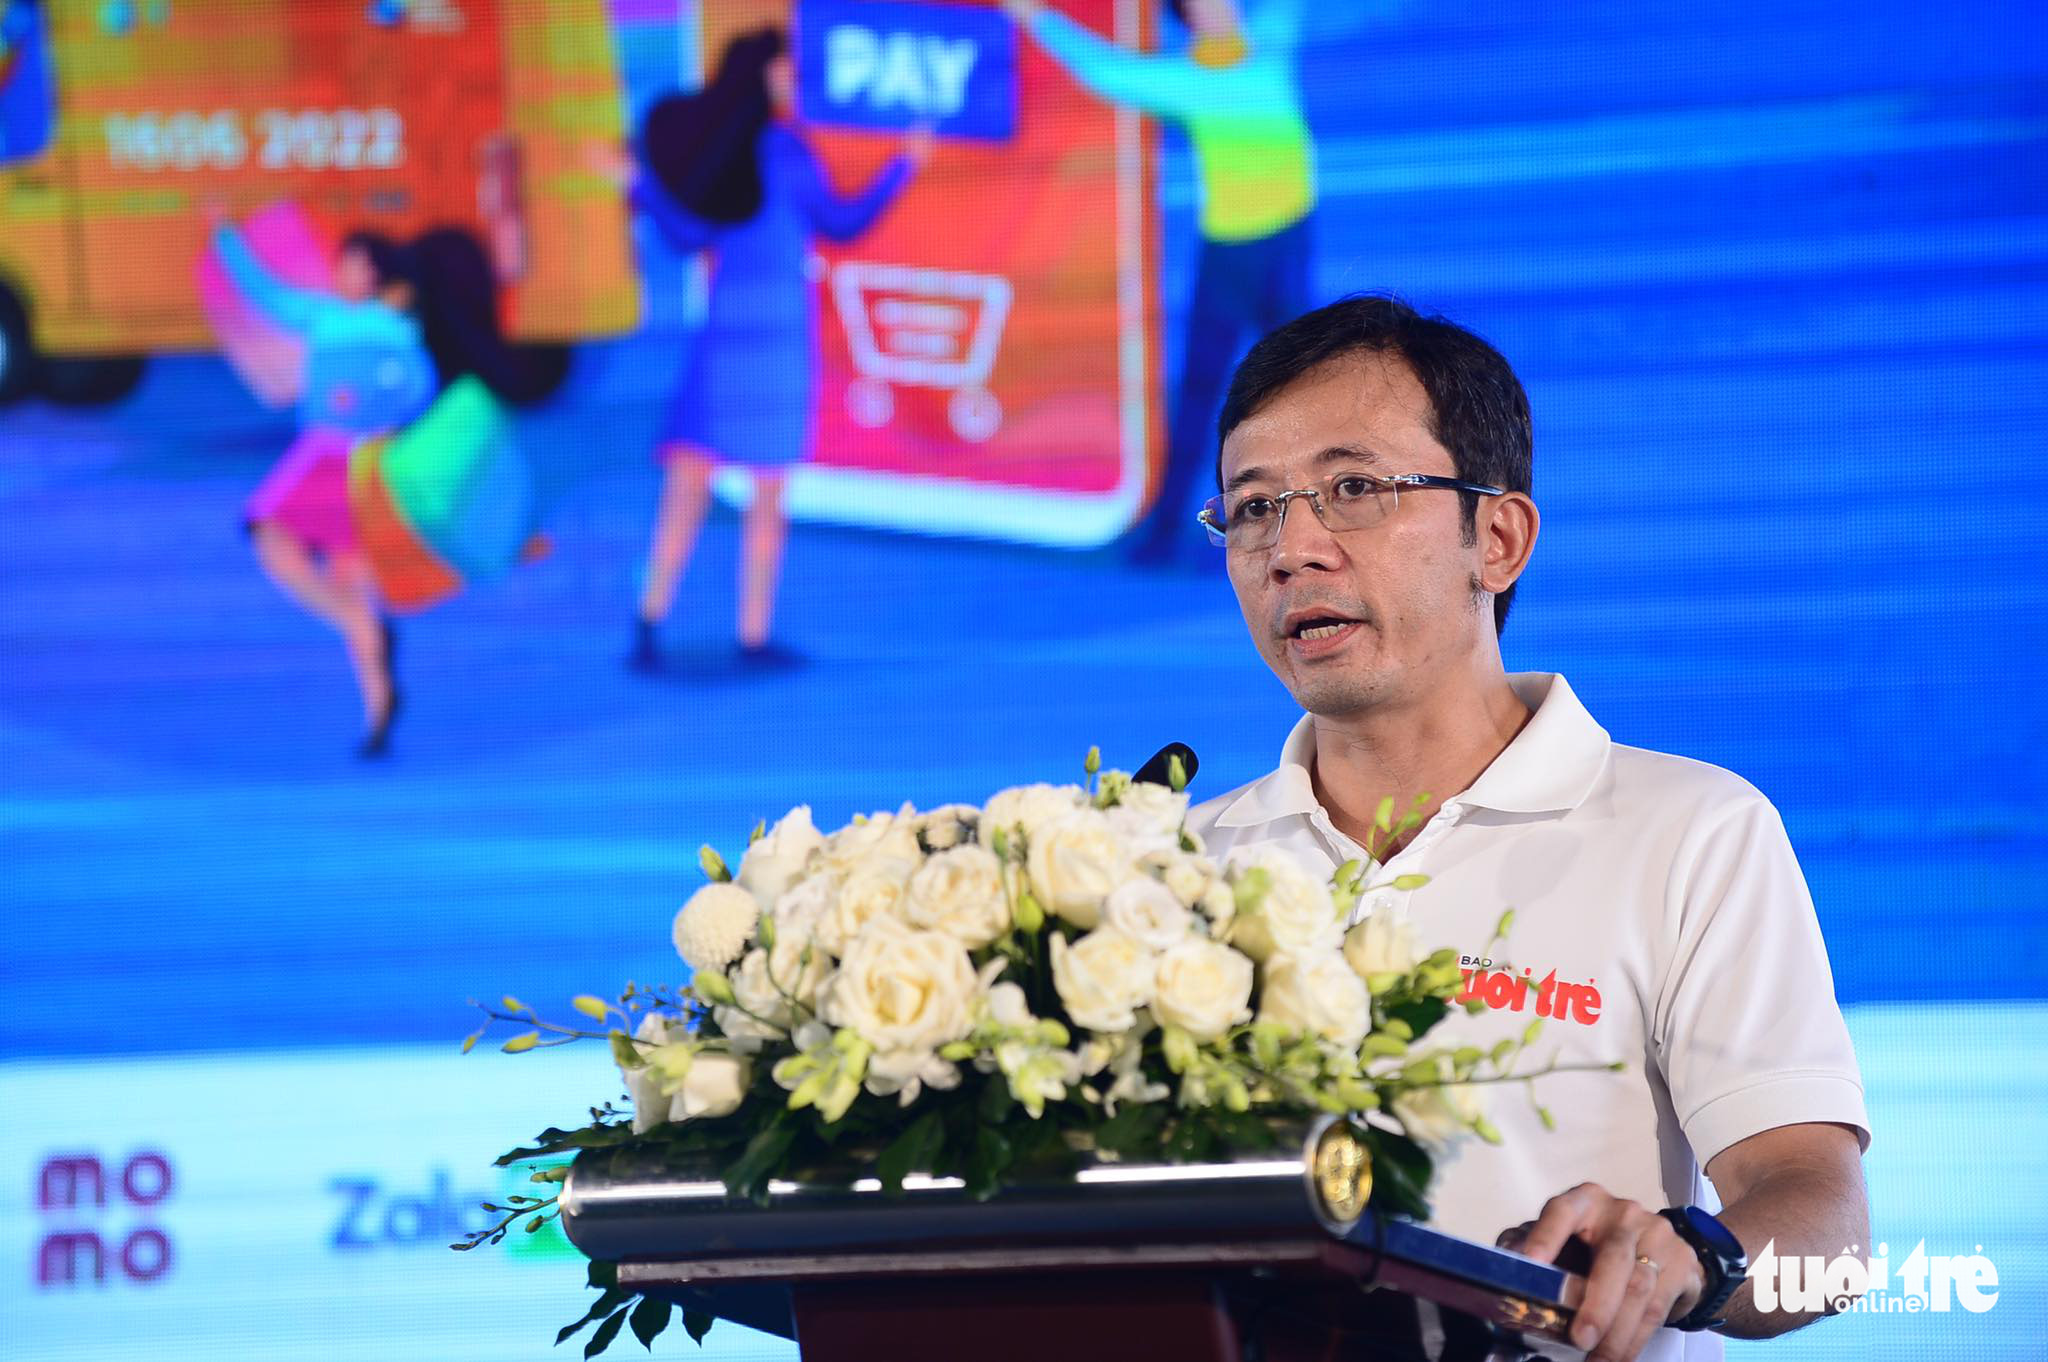 Tran Xuan Toan, member of Tuoi Tre (Youth) newspaper’s editorial board, speaks at the Cashless Fair in Thu Duc City, Ho Chi Minh City, June 12, 2022. Photo: Quang Dinh / Tuoi Tre